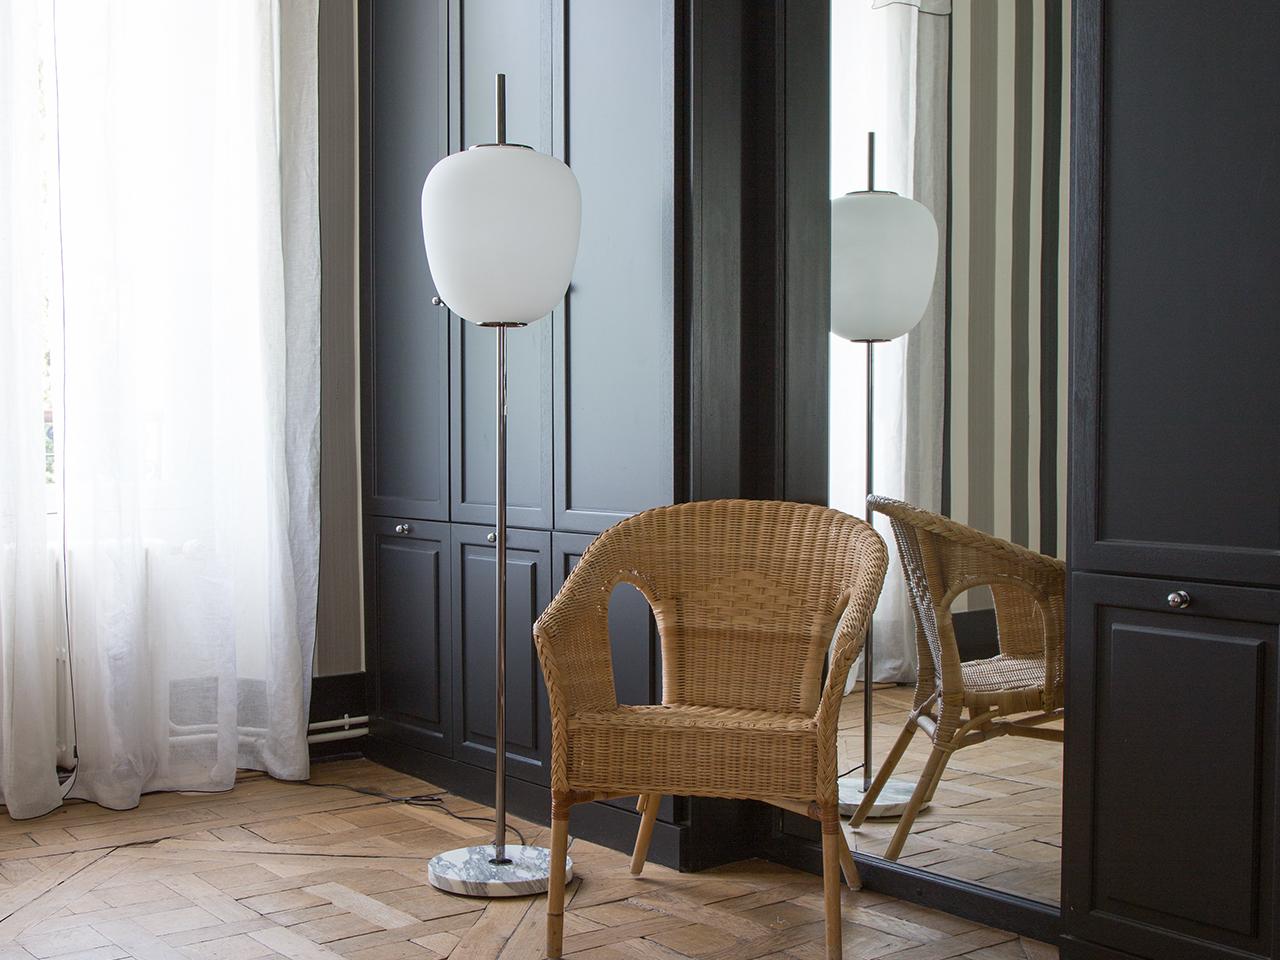 Floor lamp model J14, Joseph-André Motte for Disderot.
Today the floor lamp J14 is a re-edition, individually numbered with the associated certificate to guarantee authenticity.
The floor lamp, is made from chromed brass, standing on a base of white